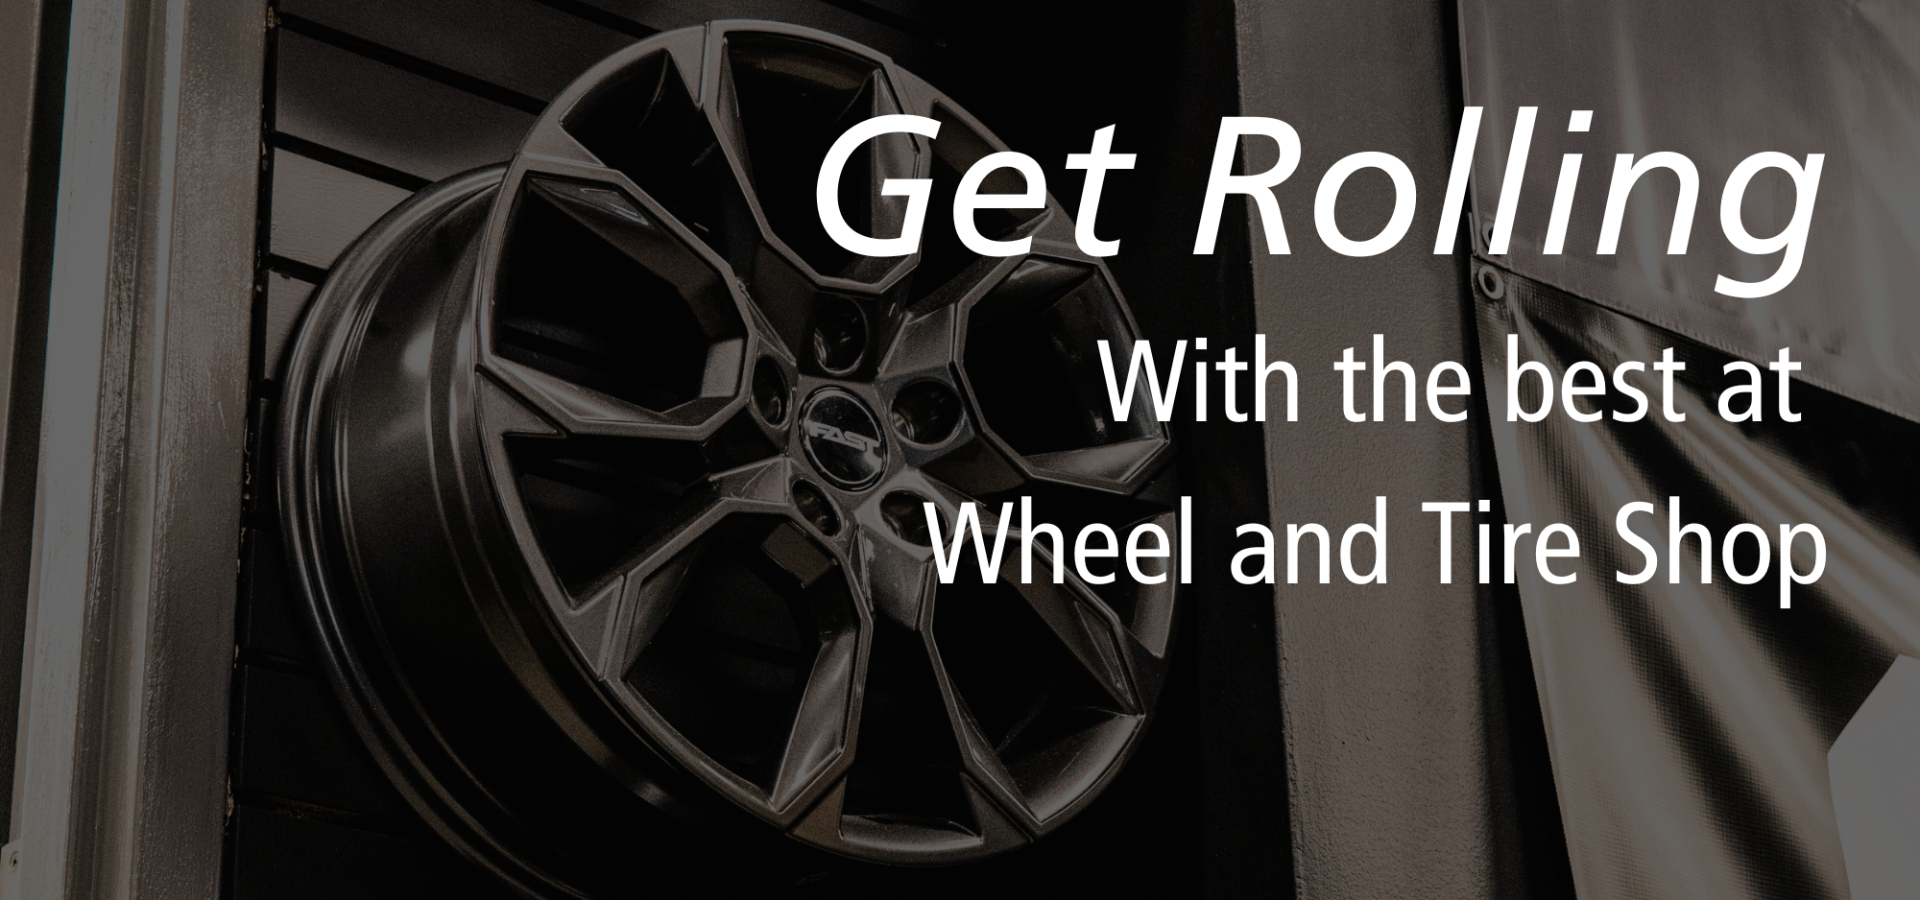 Wheel and Tire Shop at AutoEdge: